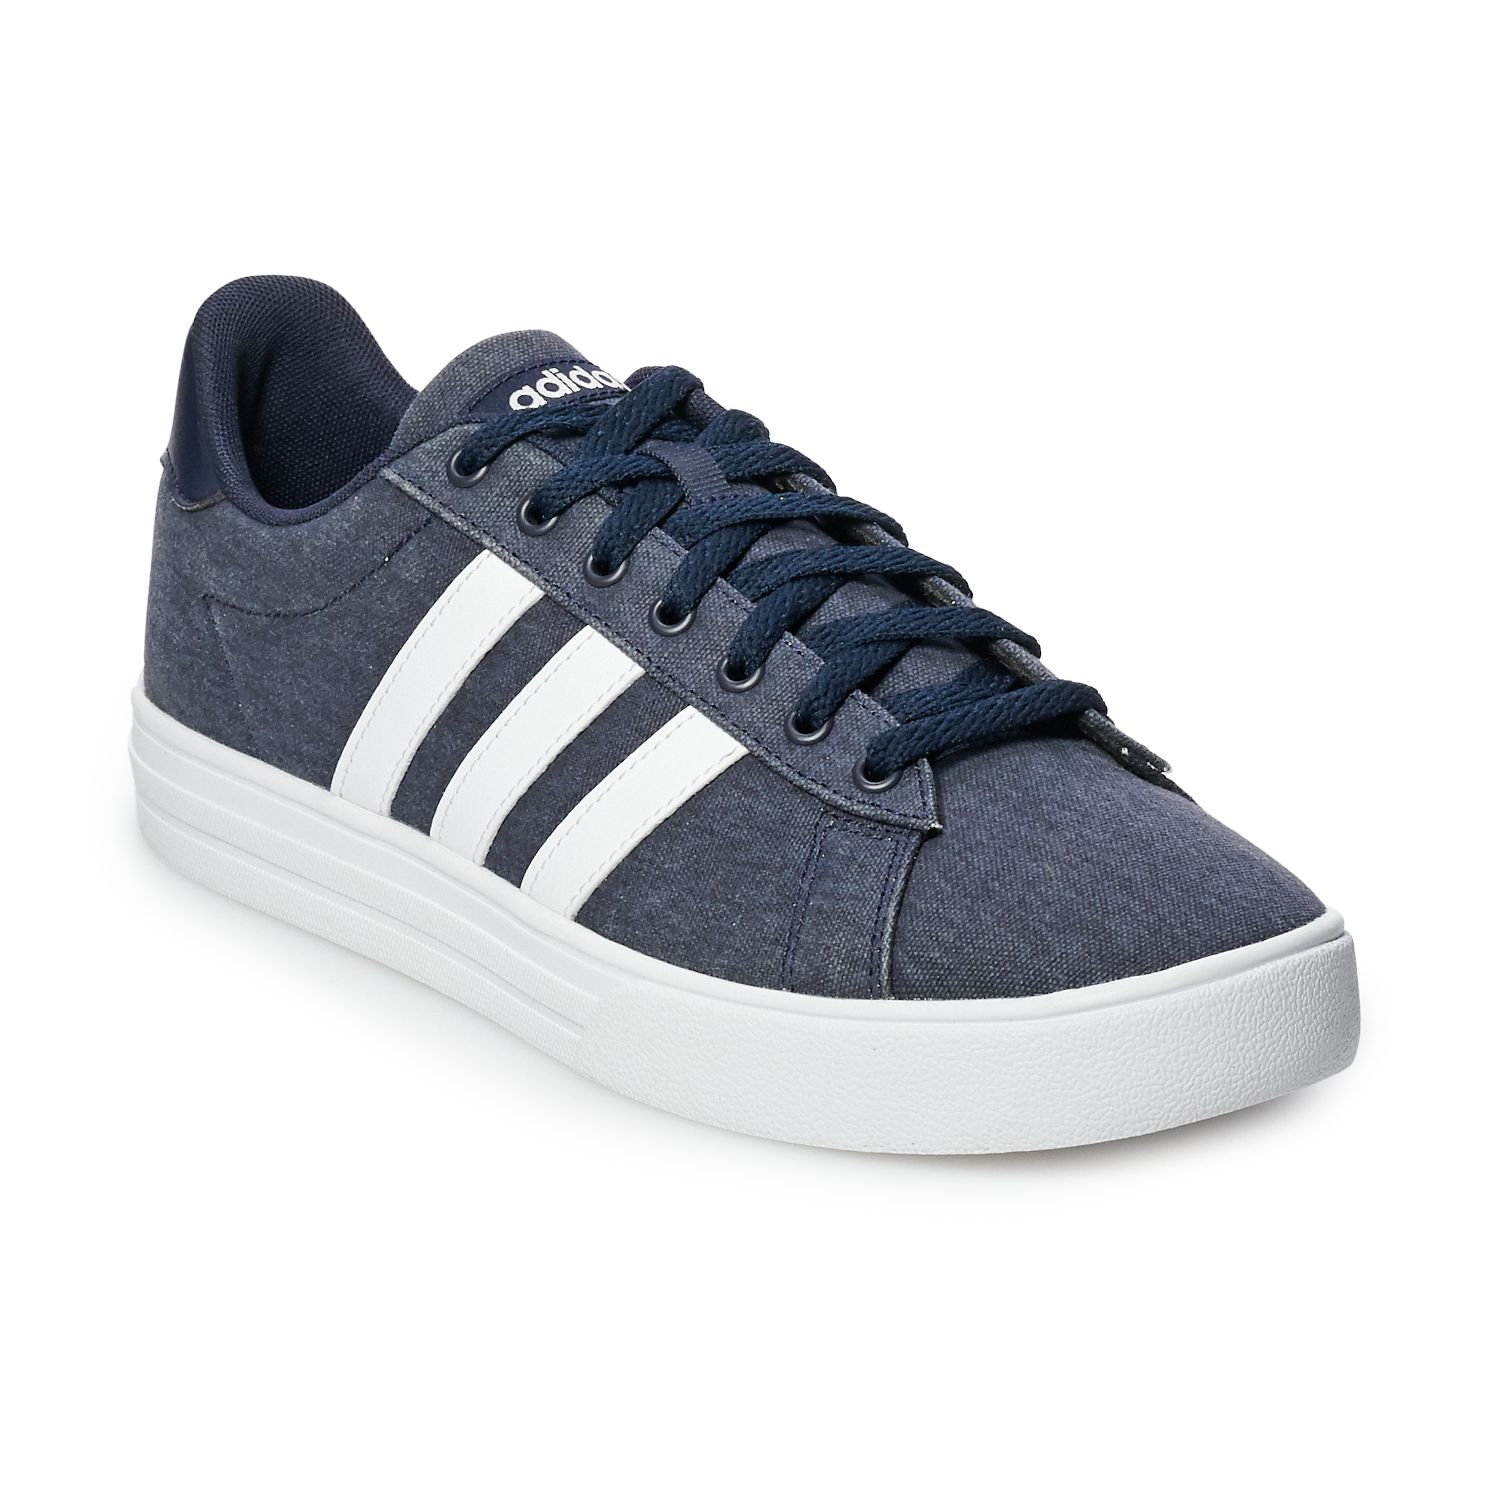 adidas men's daily 2.0 shoes